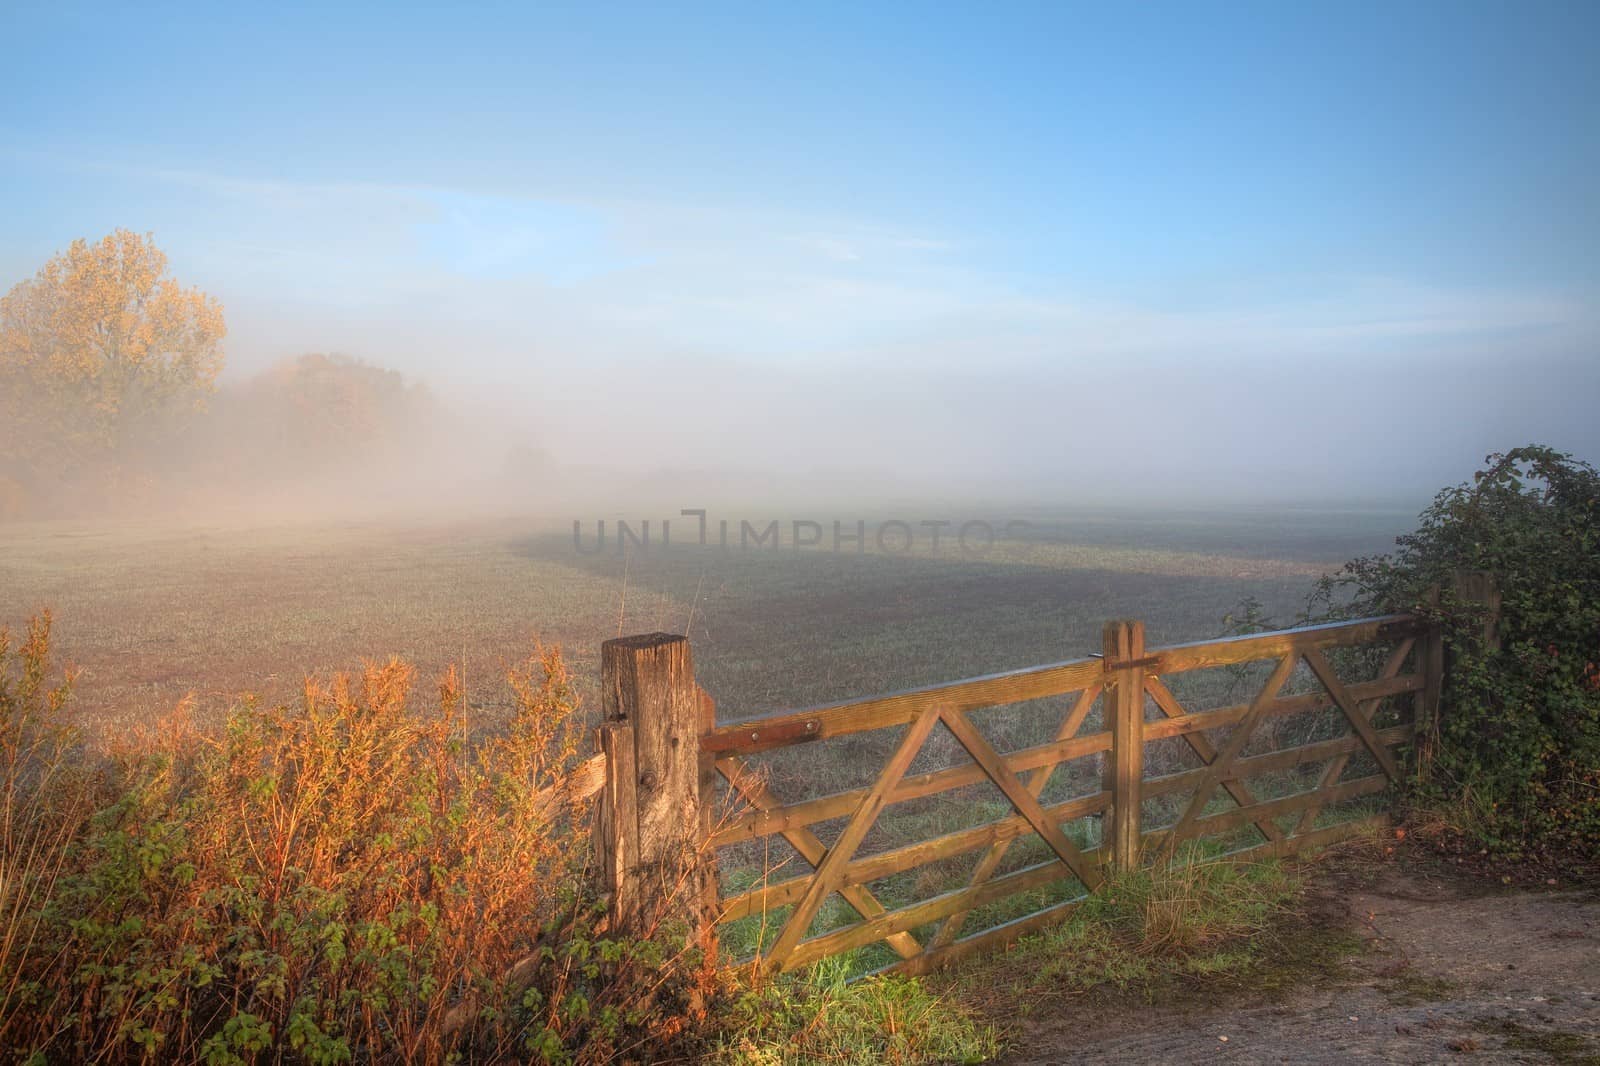 Misty countryside scene with 5-bar gate, Mickleton, Gloucestershire, England.